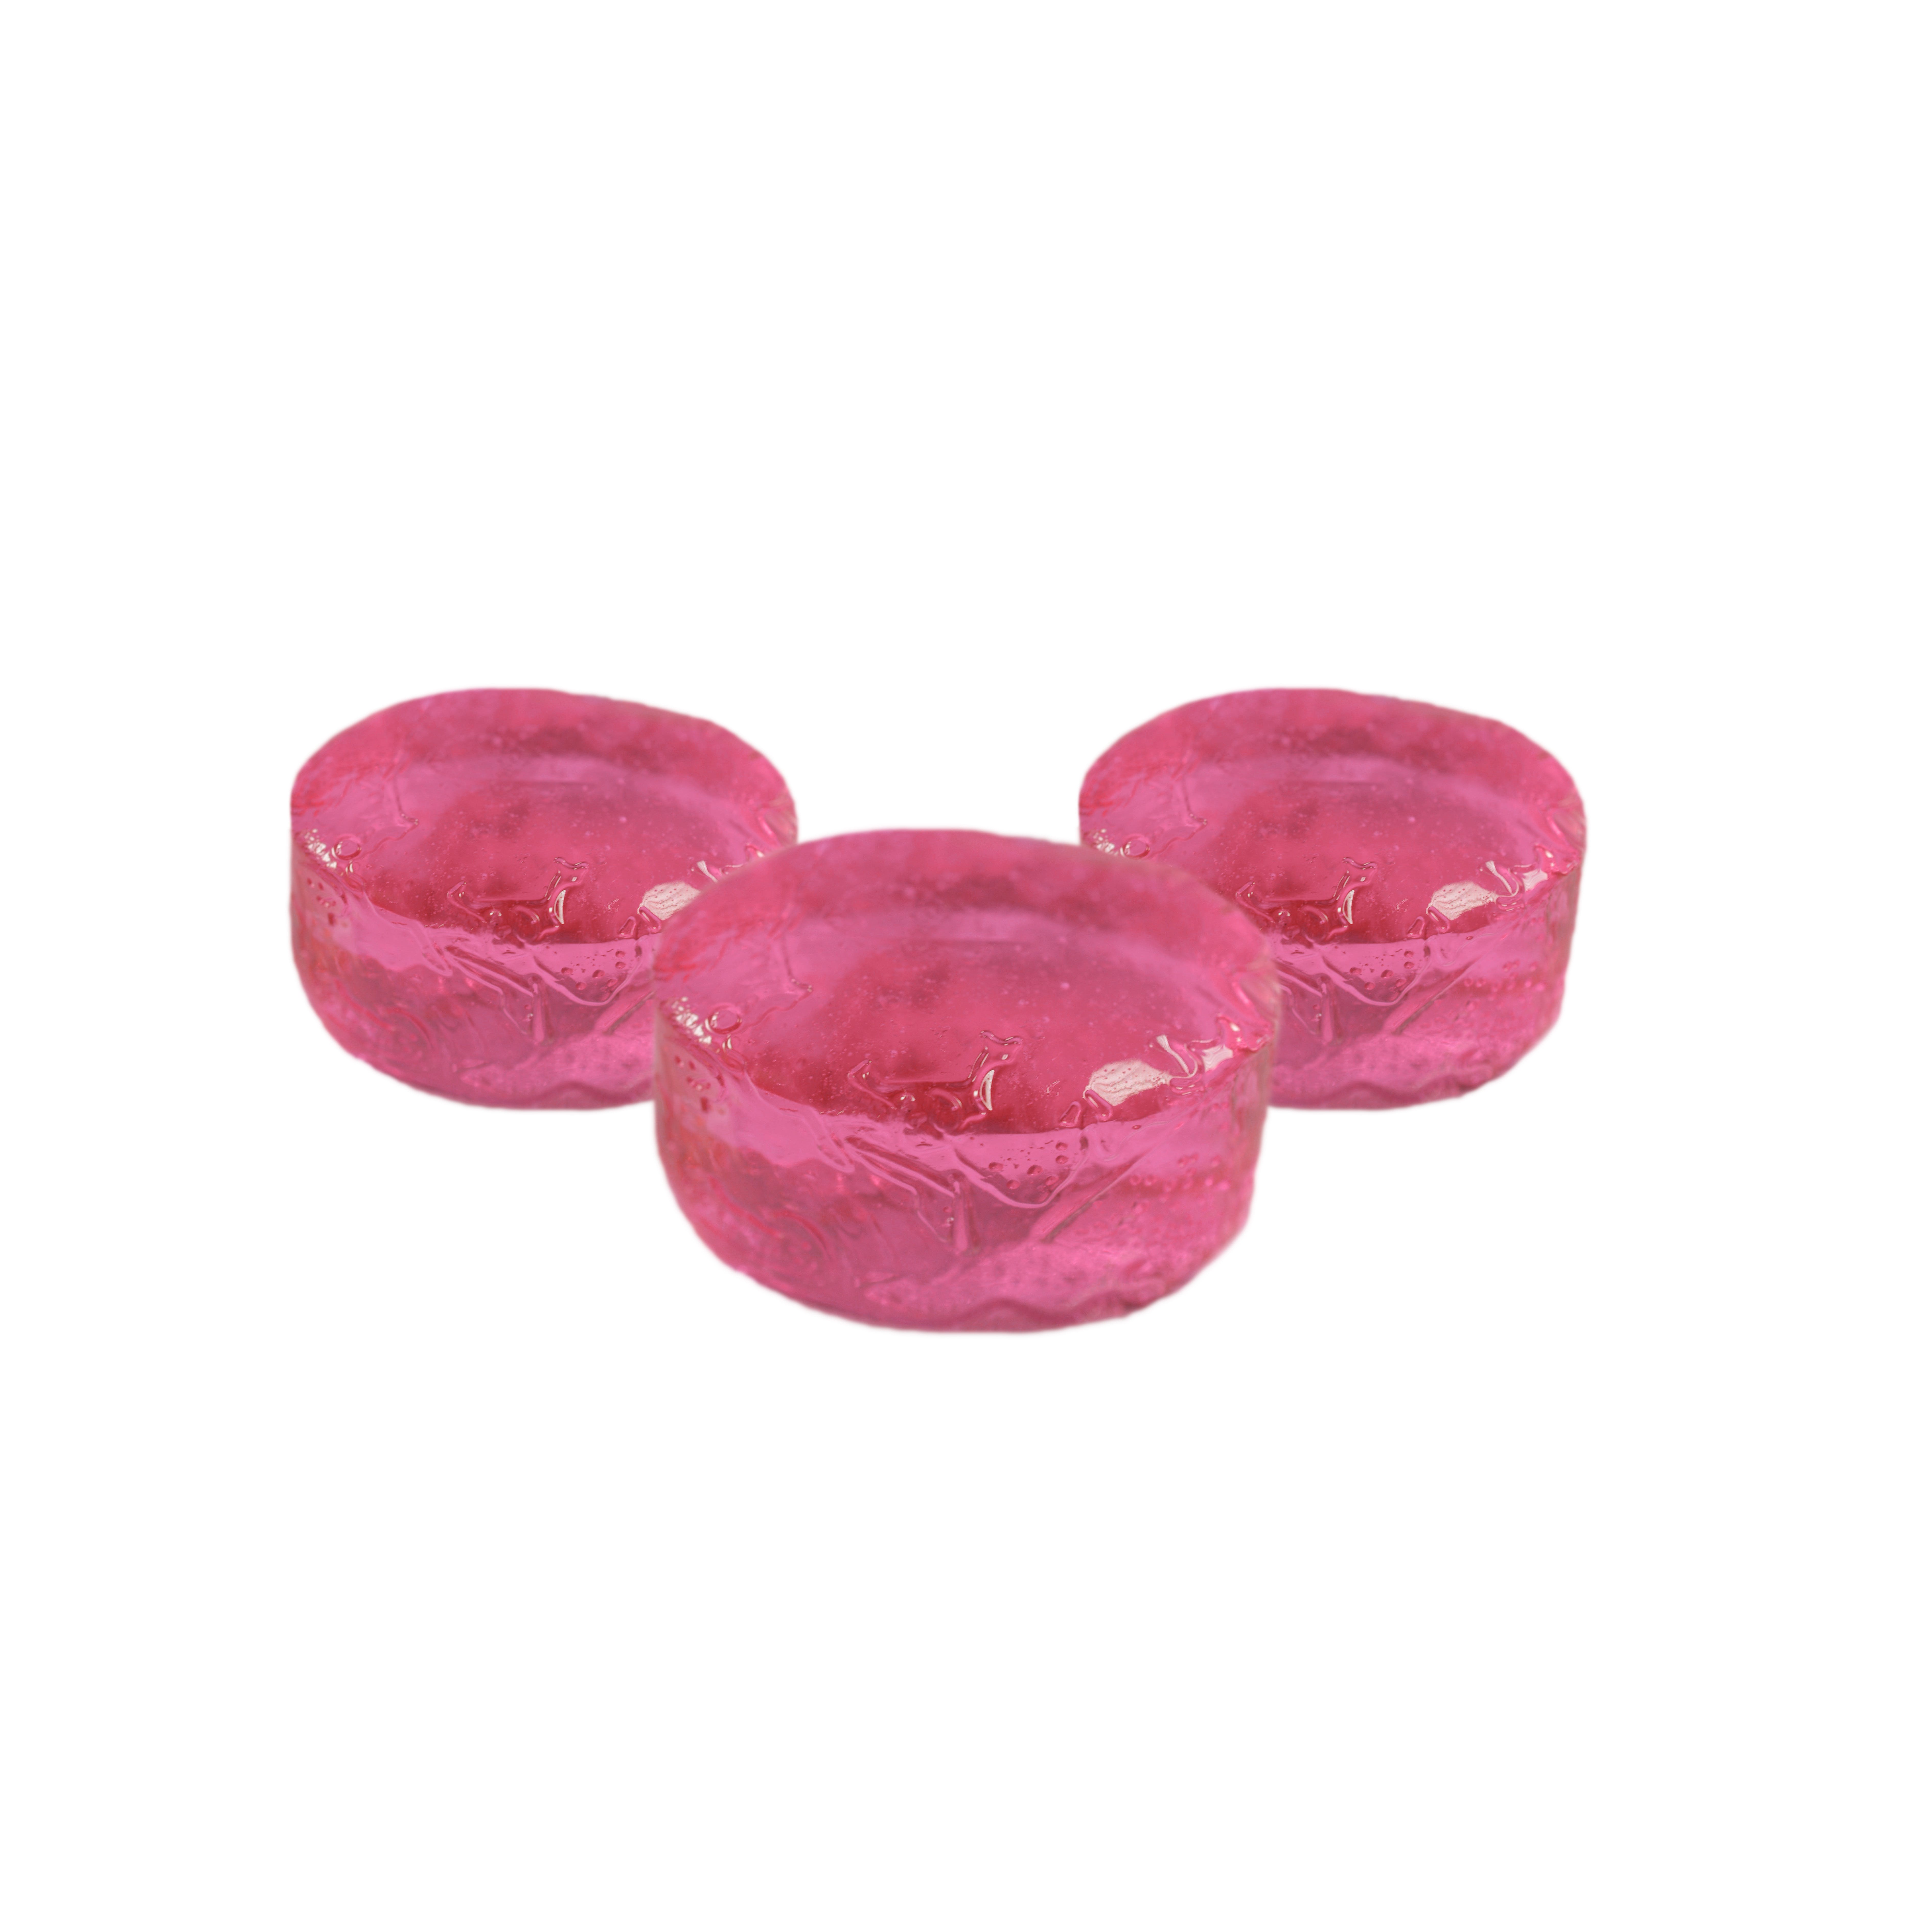 Hard Candy - Watermelon 5 Pack